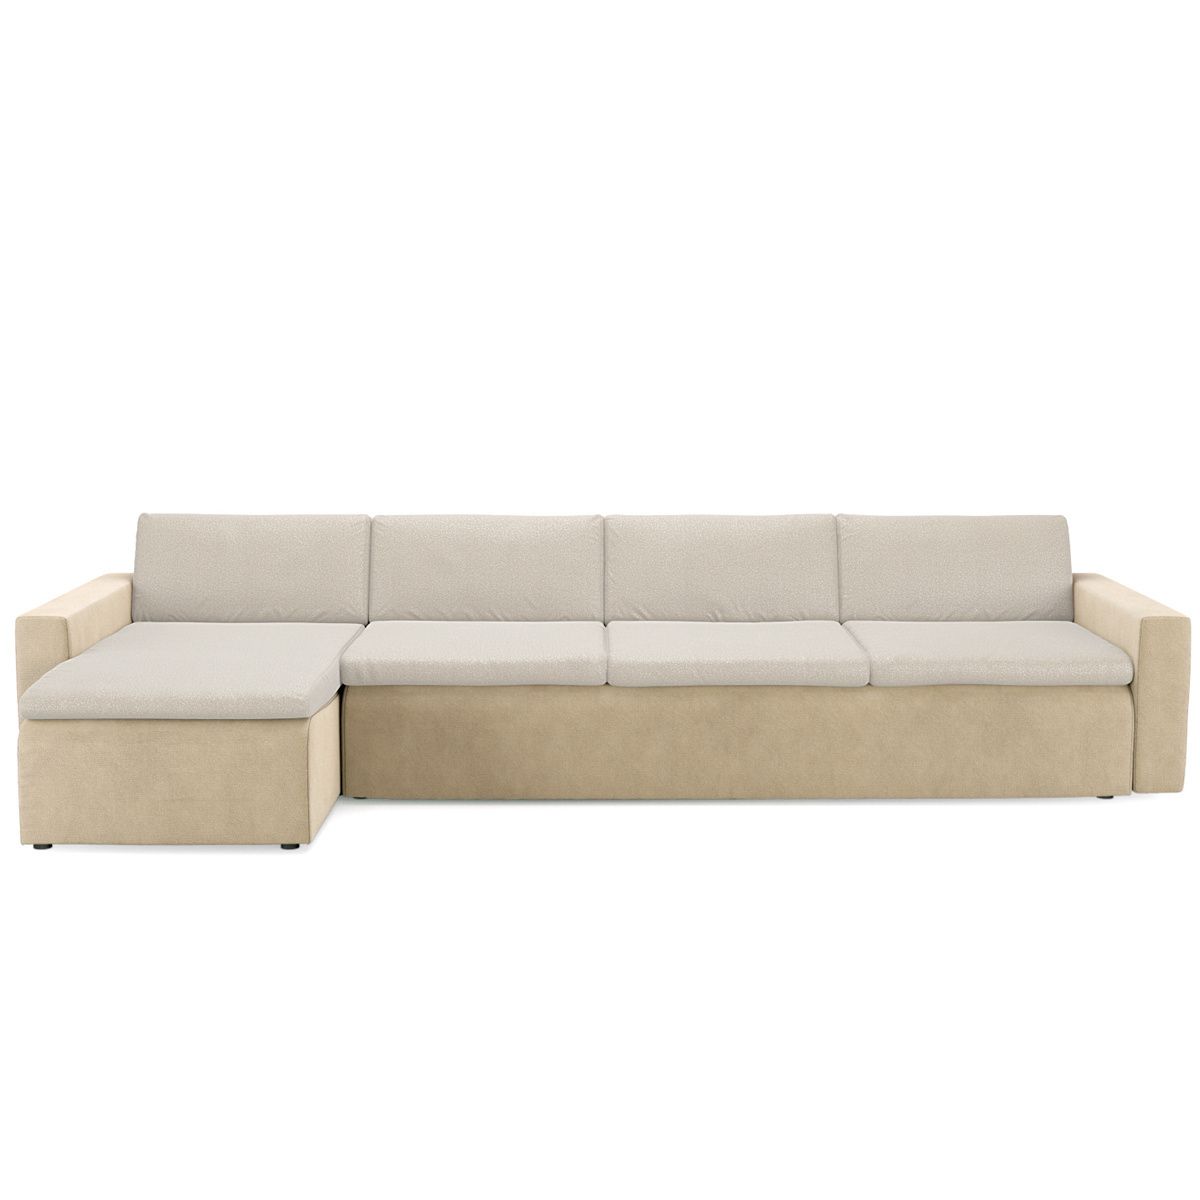 Beige Mohair And Wool Corner Sofa – Aldo – The Socialite Family Throughout Microfiber Sectional Corner Sofas (View 6 of 15)